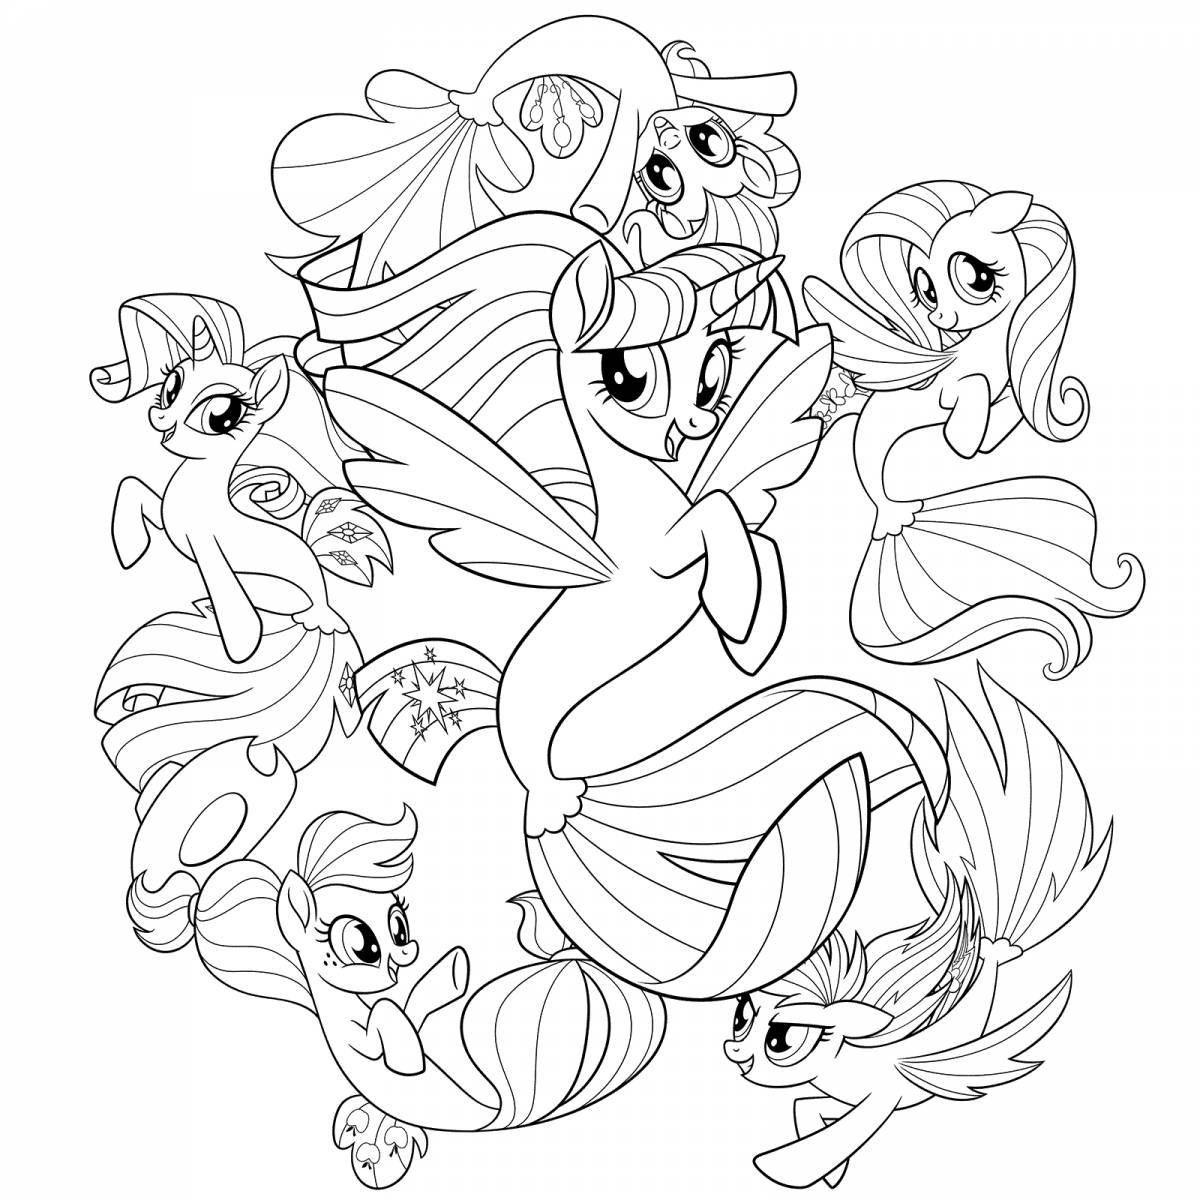 Outstanding pony coloring page